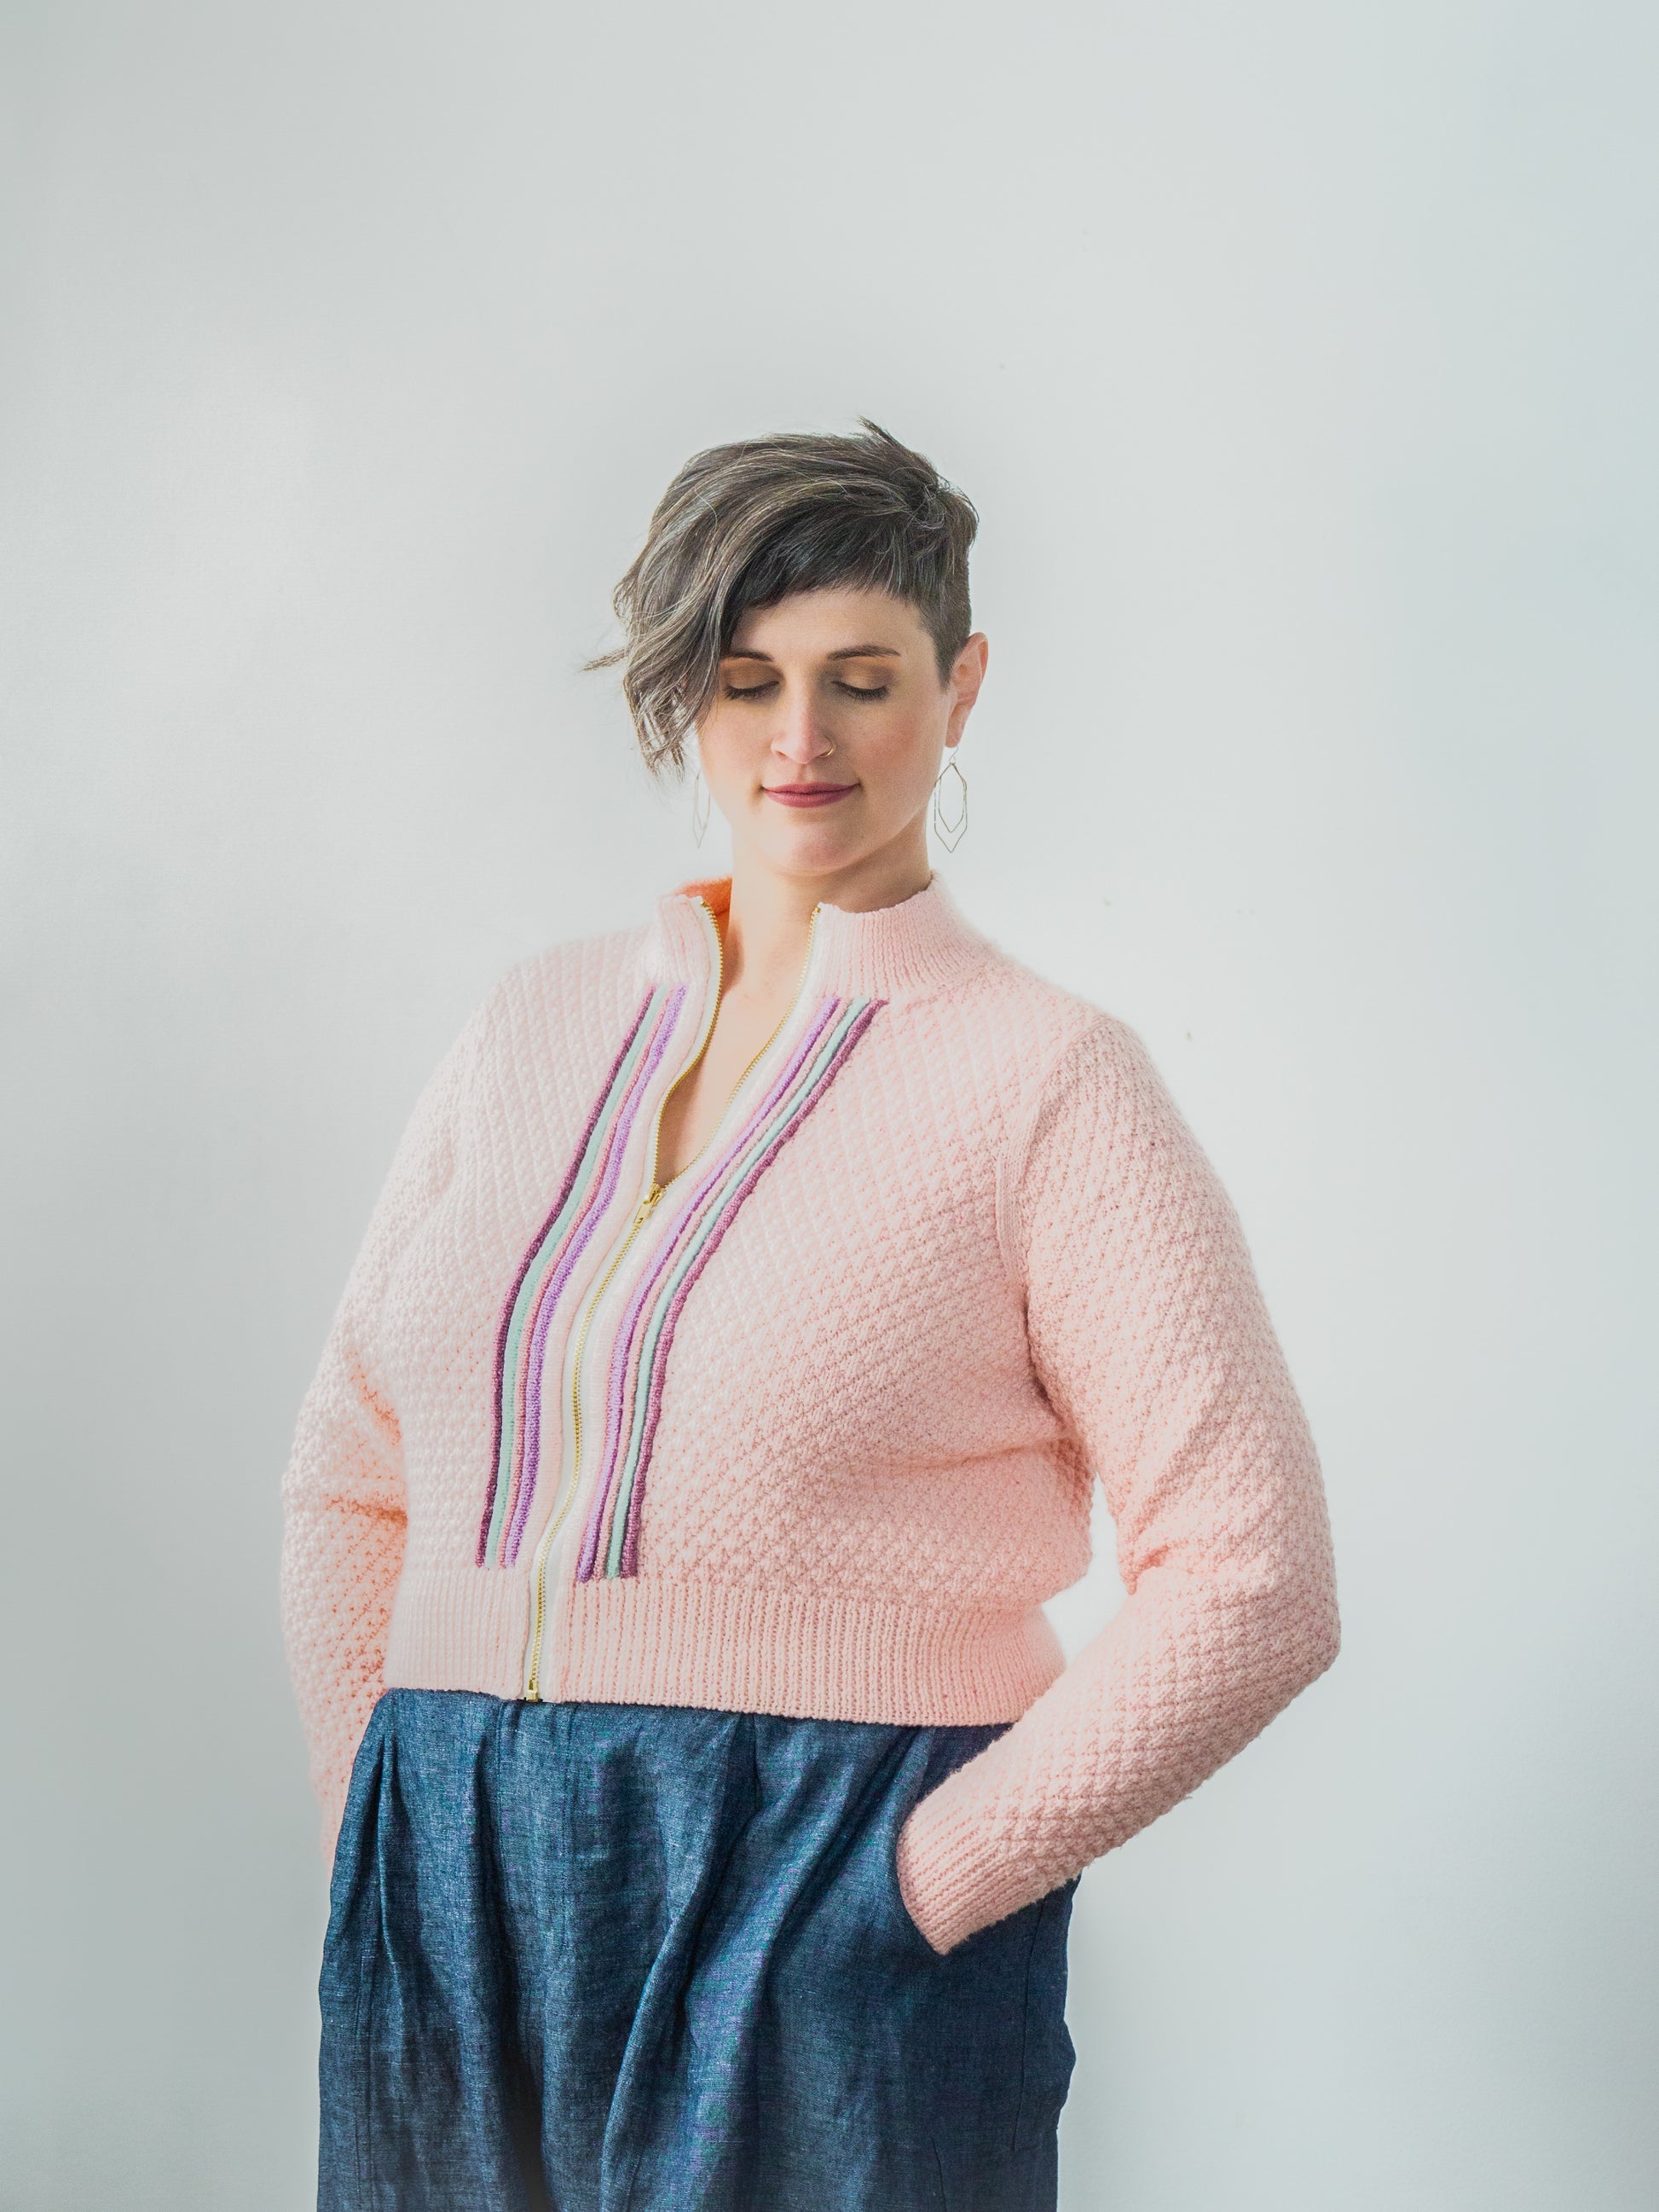 Jen, hands in the pockets of a blue skirt, wears a light pink moss stitch jacket. The jacket features a gold zipper, with multi-colored plackets around the zipper band.